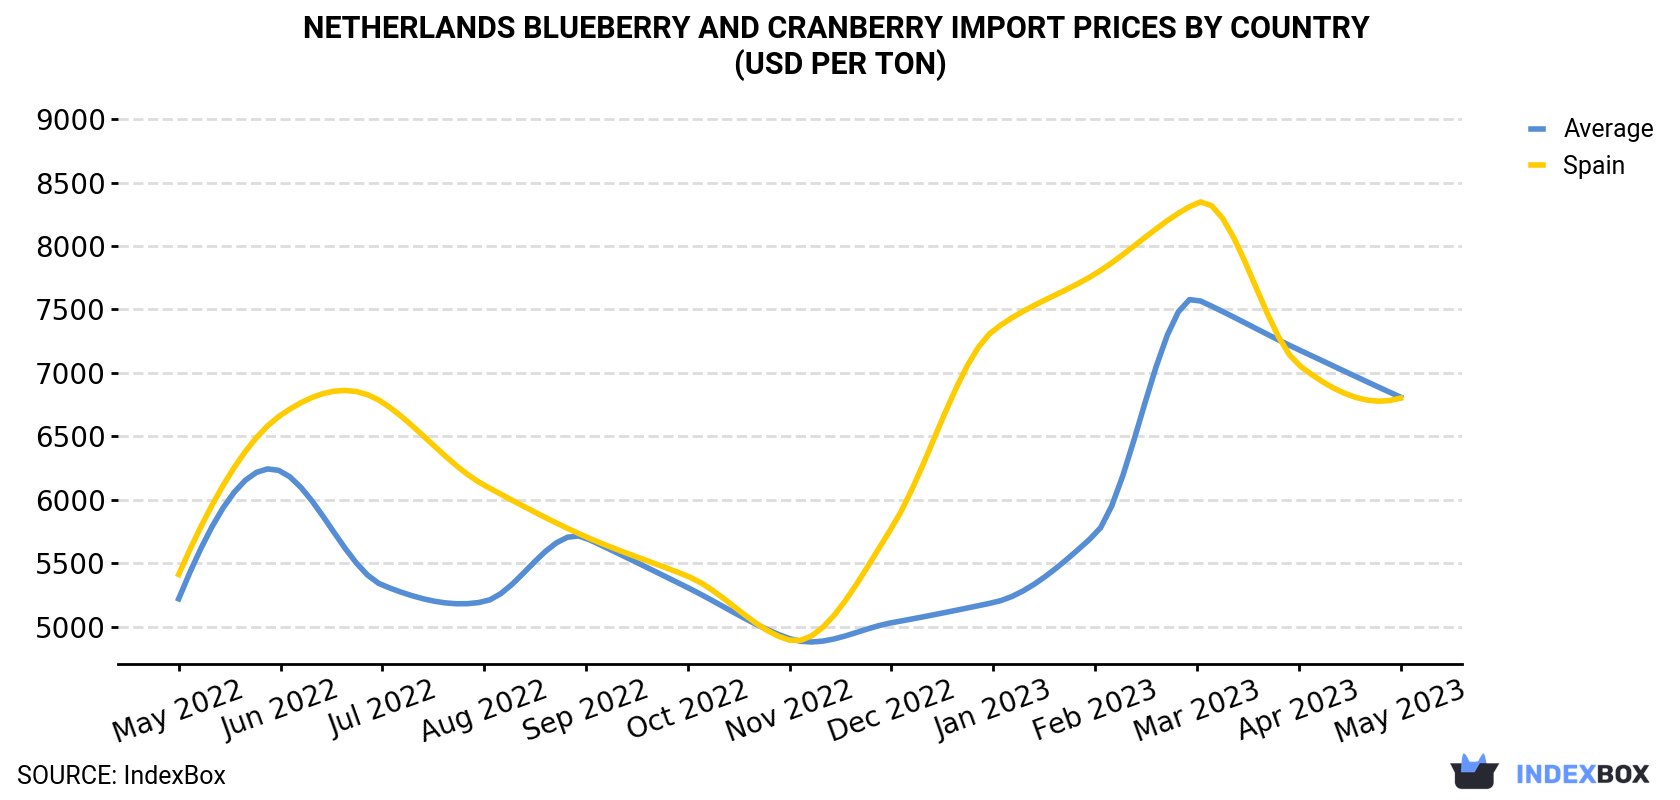 Netherlands Blueberry And Cranberry Import Prices By Country (USD Per Ton)